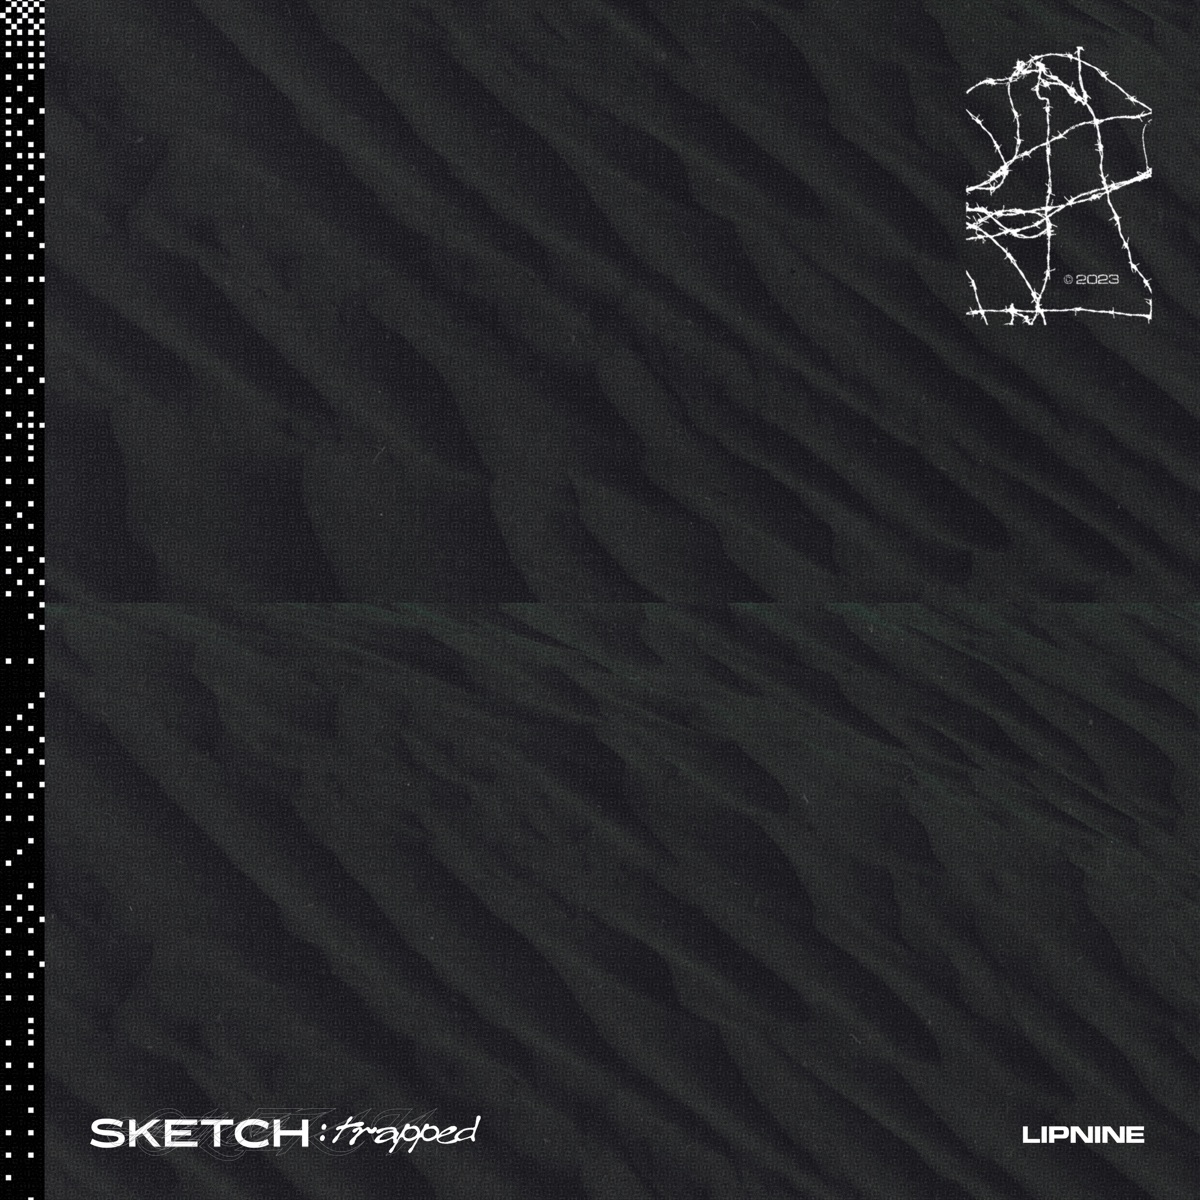 LIPNINE – SKETCH : trapped – EP